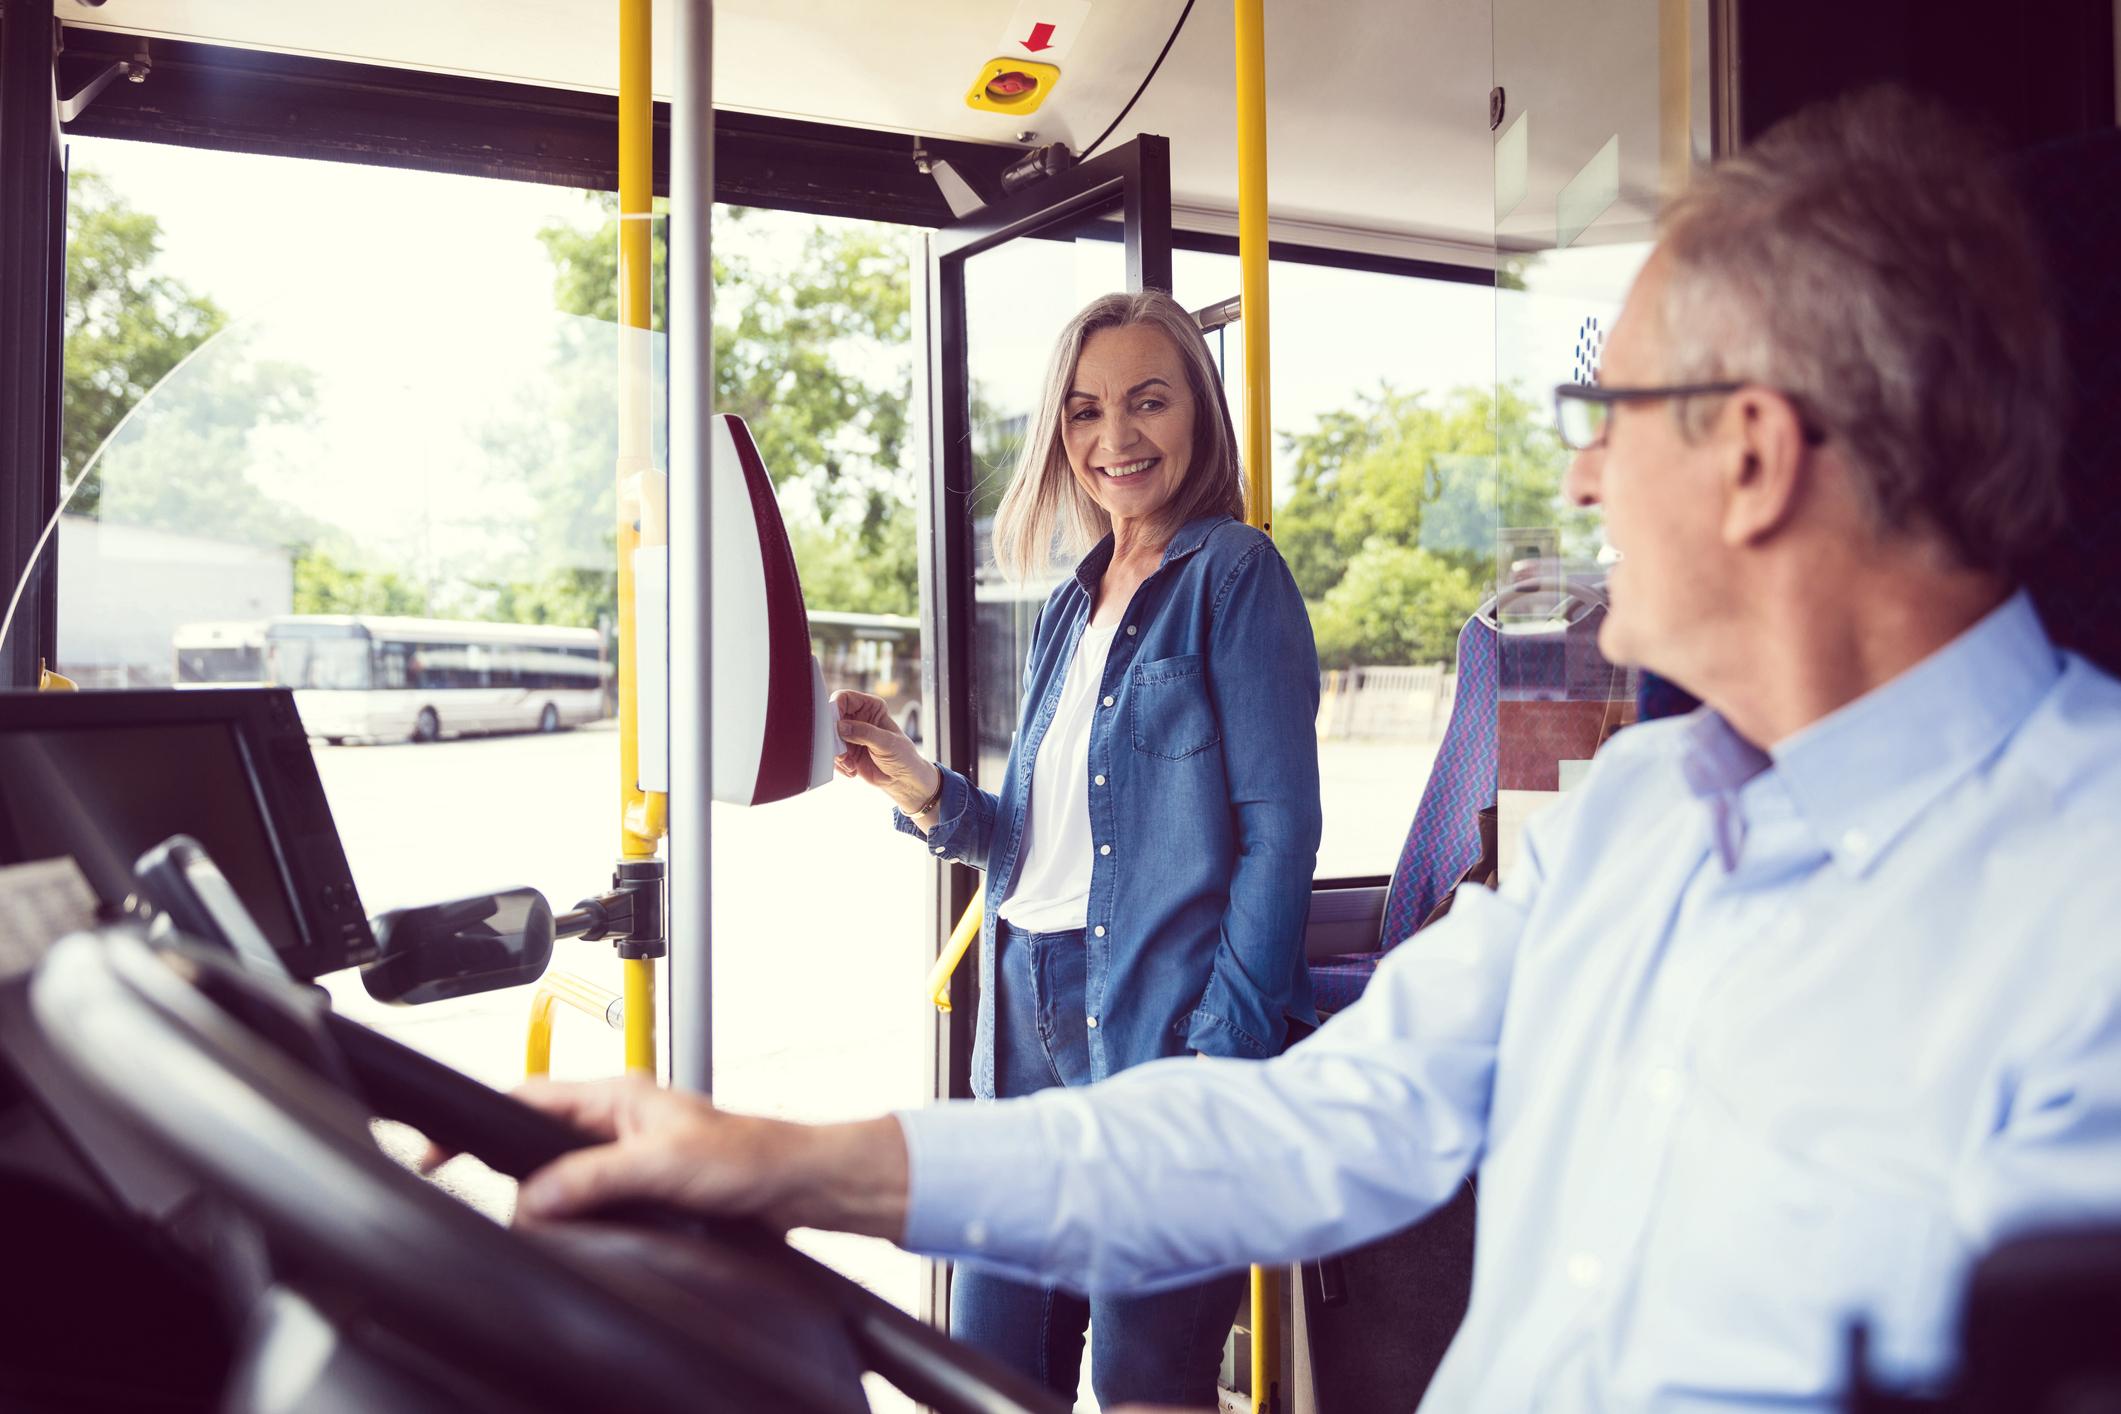  Image of a woman paying on a bus via contactless 